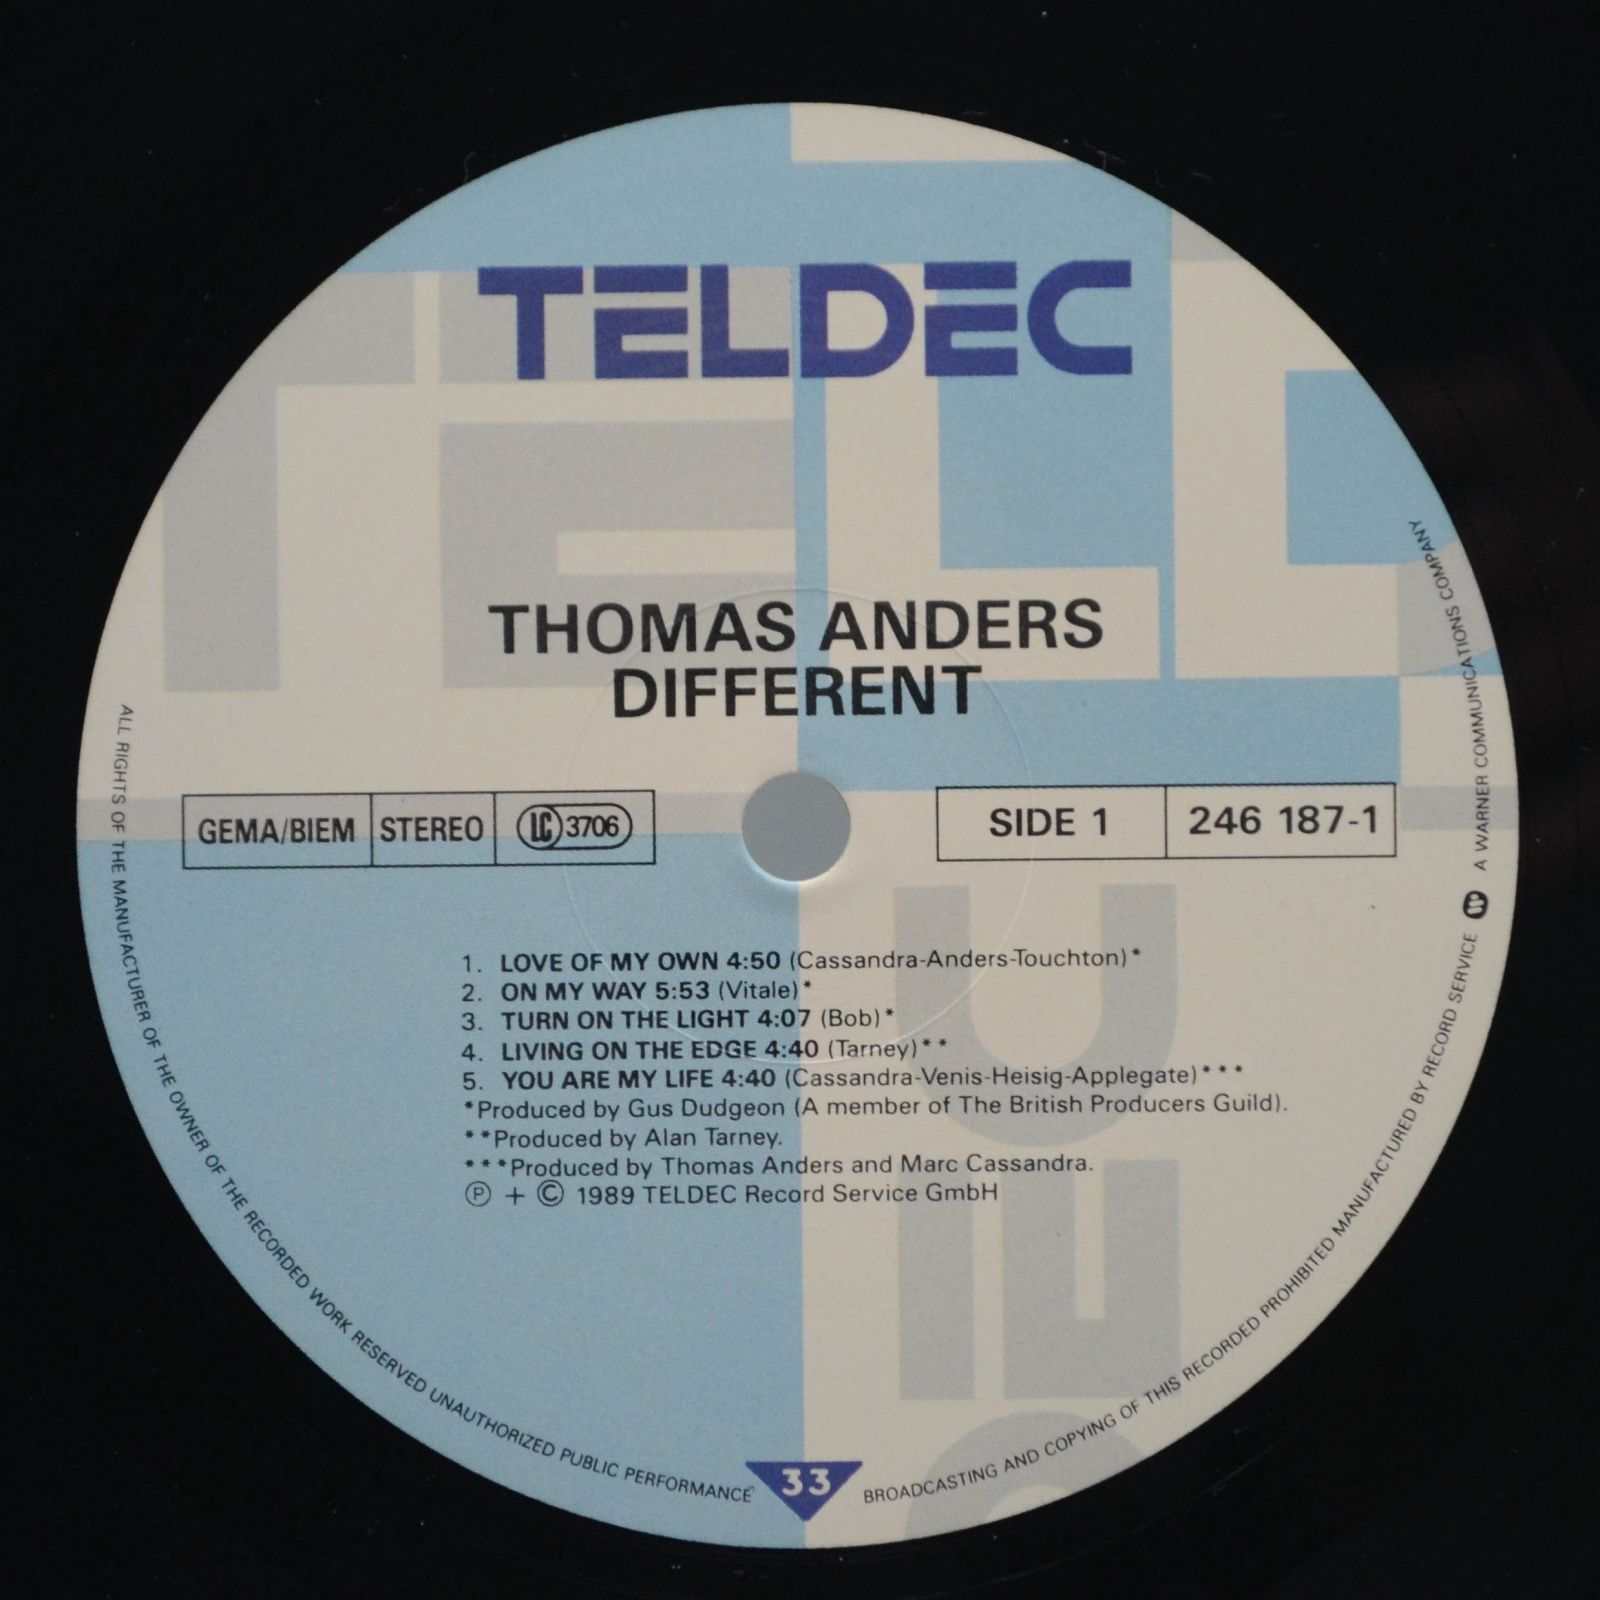 Thomas Anders — Different, 1989